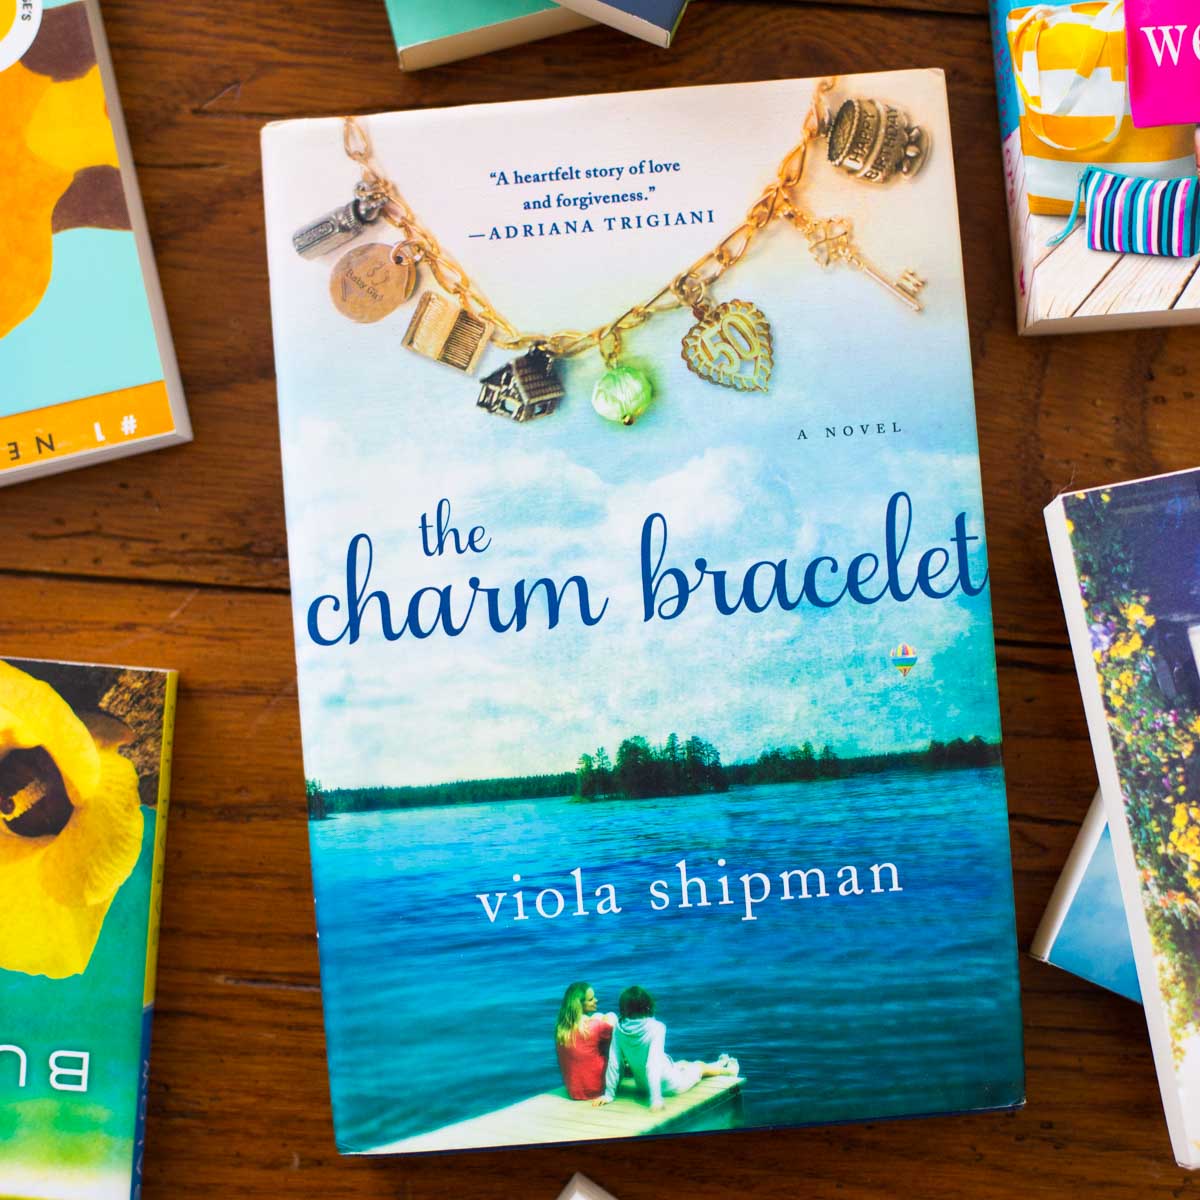 A copy of the book The Charm Bracelet is on the table.